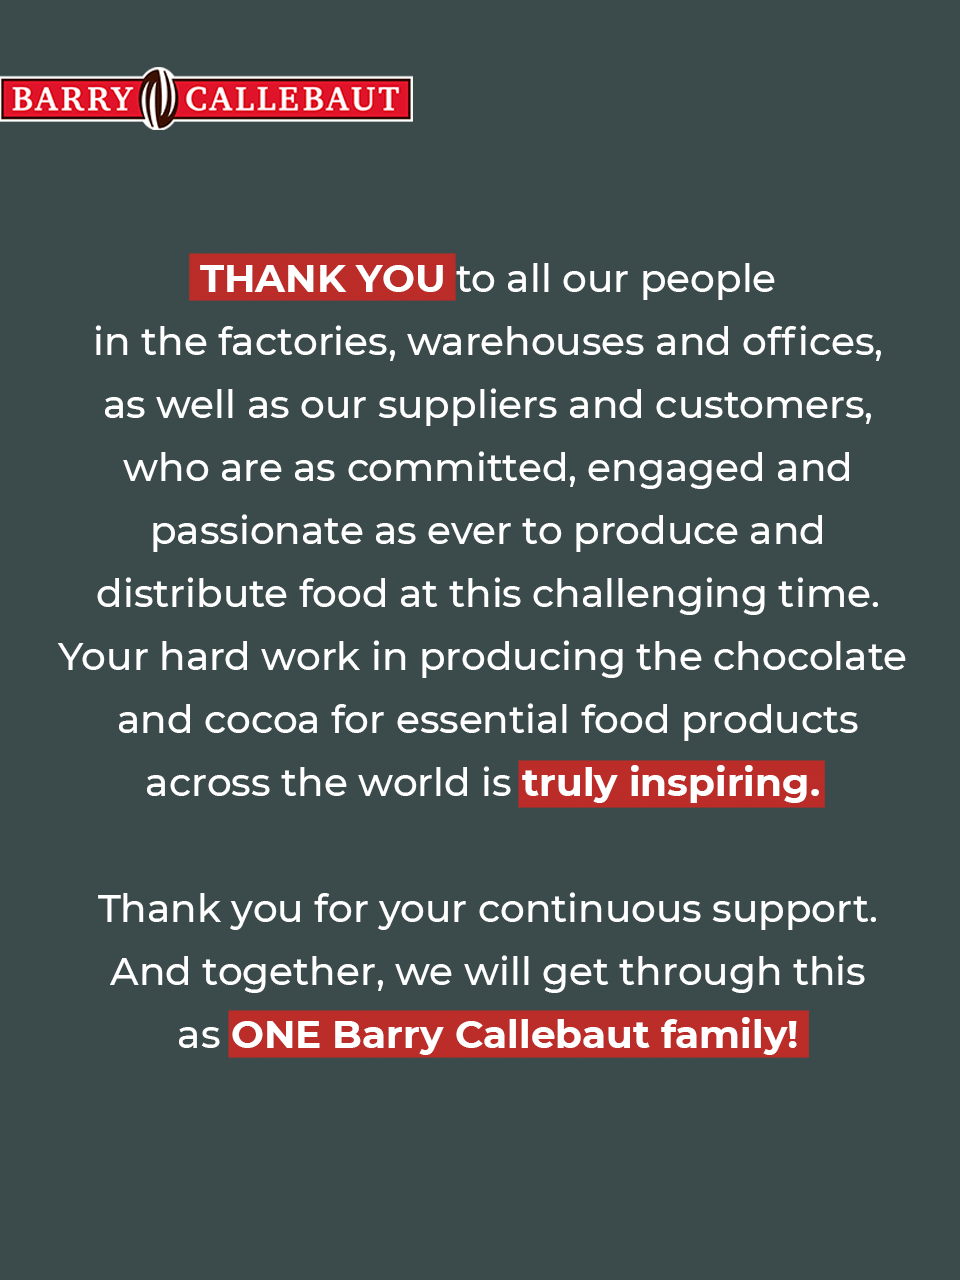 Barry Callebaut Thank You Message COVID-19 Employees, Customer, Suppliers